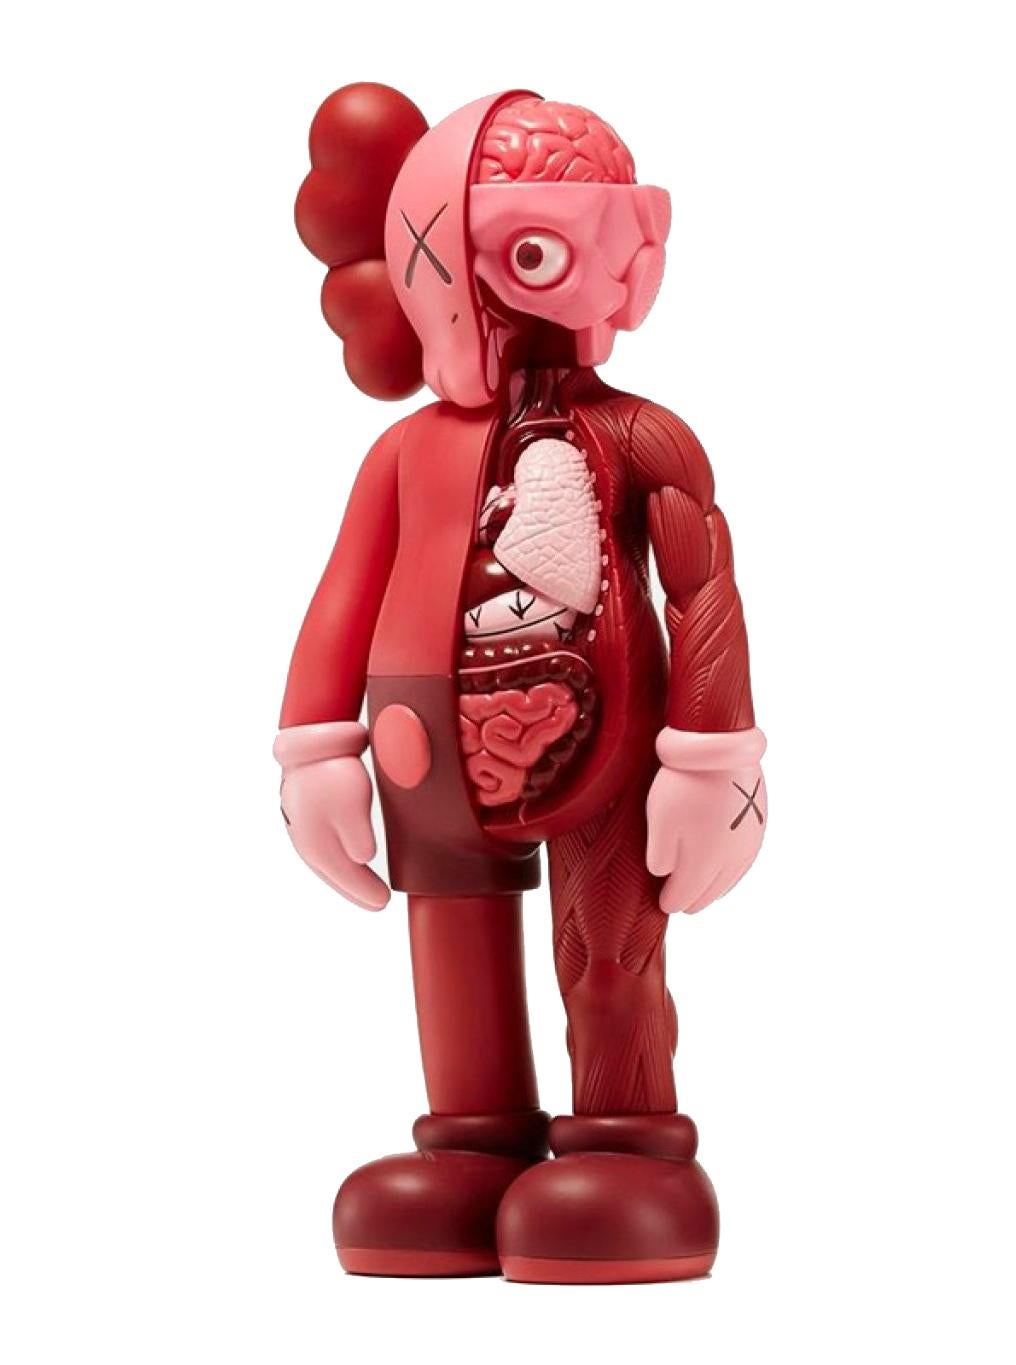 KAWS - Set of 2 Companion Blush (Flayed) and Companion Blush- Painted Cast Vinyl For Sale 1